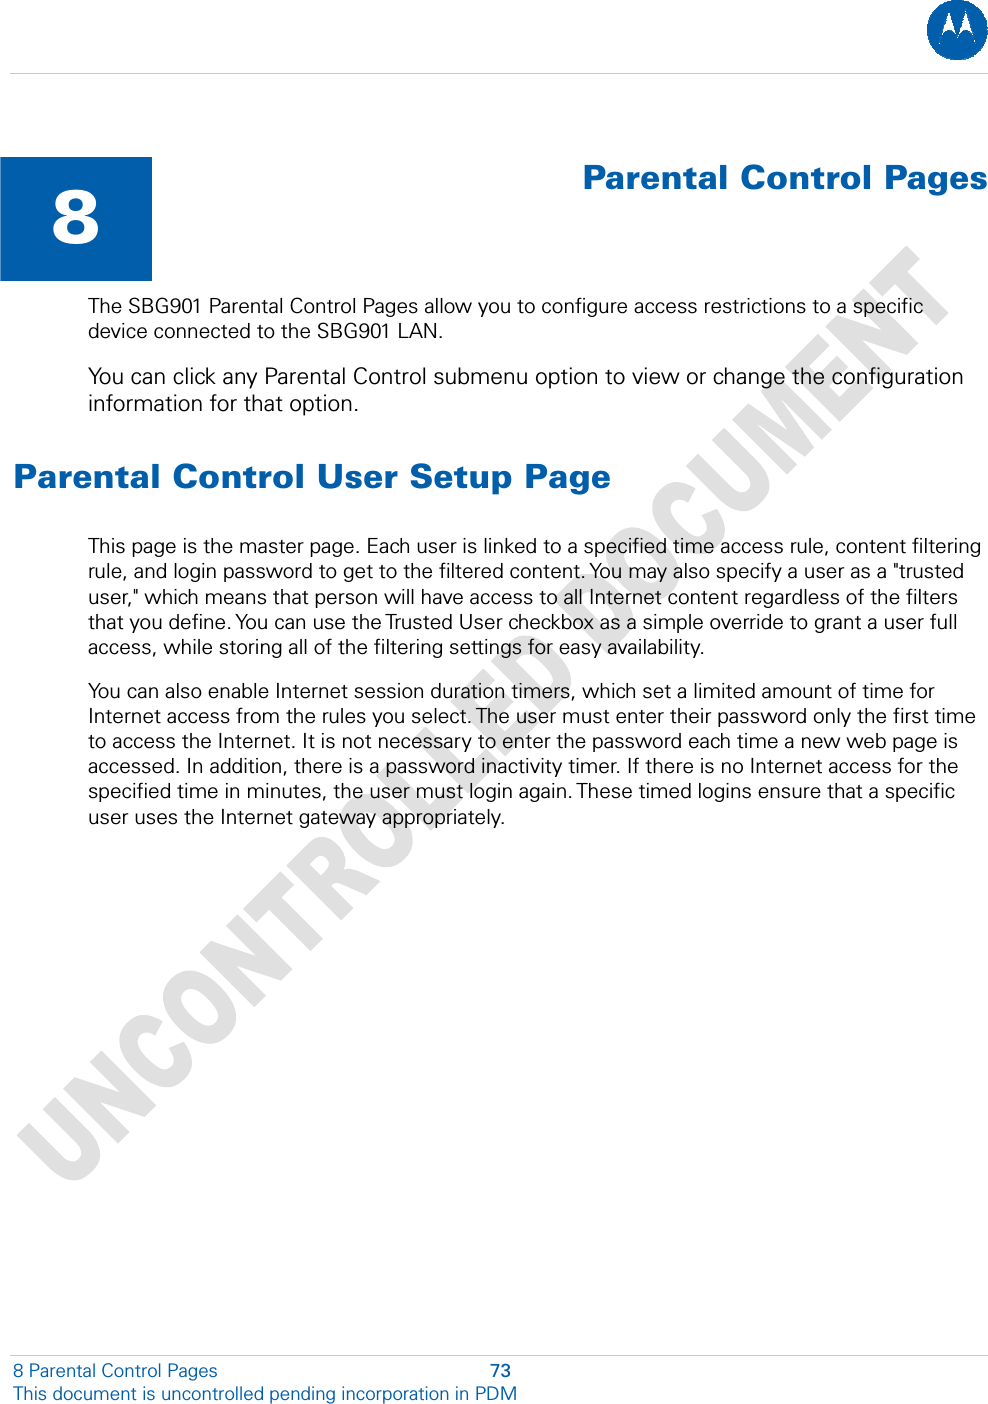   8  Parental Control PagesThe SBG901 Parental Control Pages allow you to configure access restrictions to a specific device connected to the SBG901 LAN. You can click any Parental Control submenu option to view or change the configuration information for that option. Parental Control User Setup Page This page is the master page. Each user is linked to a specified time access rule, content filtering rule, and login password to get to the filtered content. You may also specify a user as a &quot;trusted user,&quot; which means that person will have access to all Internet content regardless of the filters that you define. You can use the Trusted User checkbox as a simple override to grant a user full access, while storing all of the filtering settings for easy availability. You can also enable Internet session duration timers, which set a limited amount of time for Internet access from the rules you select. The user must enter their password only the first time to access the Internet. It is not necessary to enter the password each time a new web page is accessed. In addition, there is a password inactivity timer. If there is no Internet access for the specified time in minutes, the user must login again. These timed logins ensure that a specific user uses the Internet gateway appropriately. 8 Parental Control Pages  73 This document is uncontrolled pending incorporation in PDM  